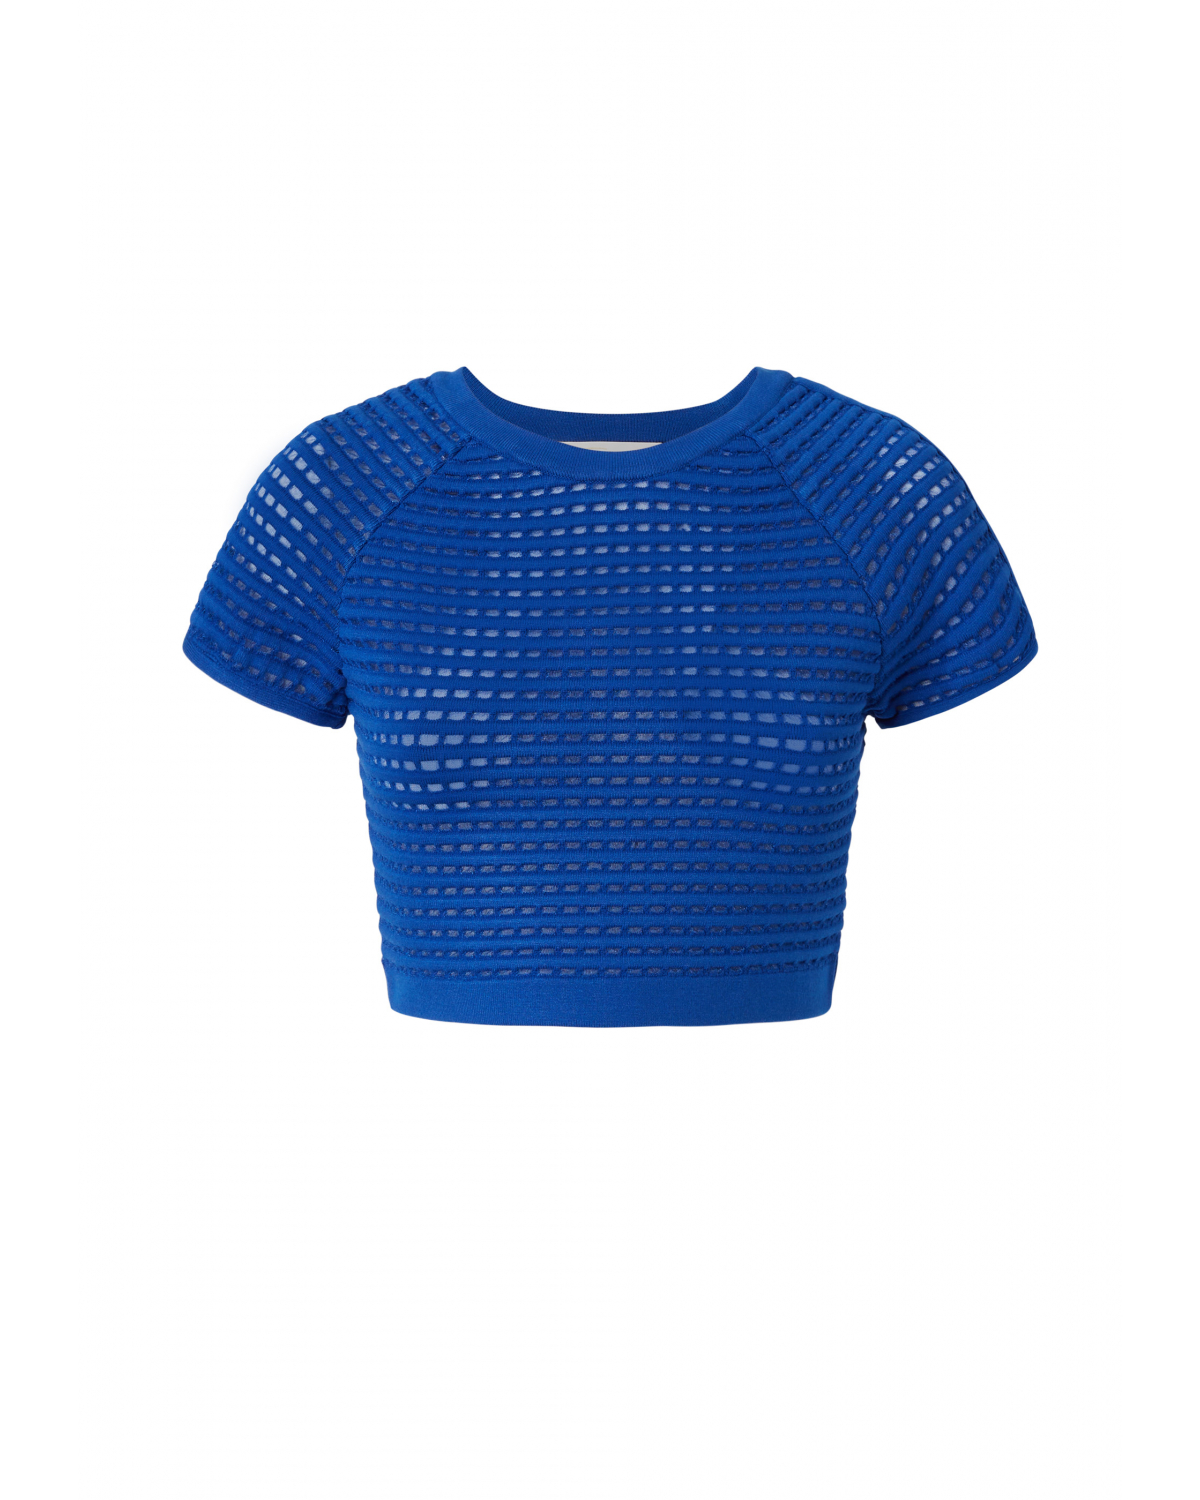 Blue iconic crop top | Iconic Capsule Collection, 73_74 | Genny